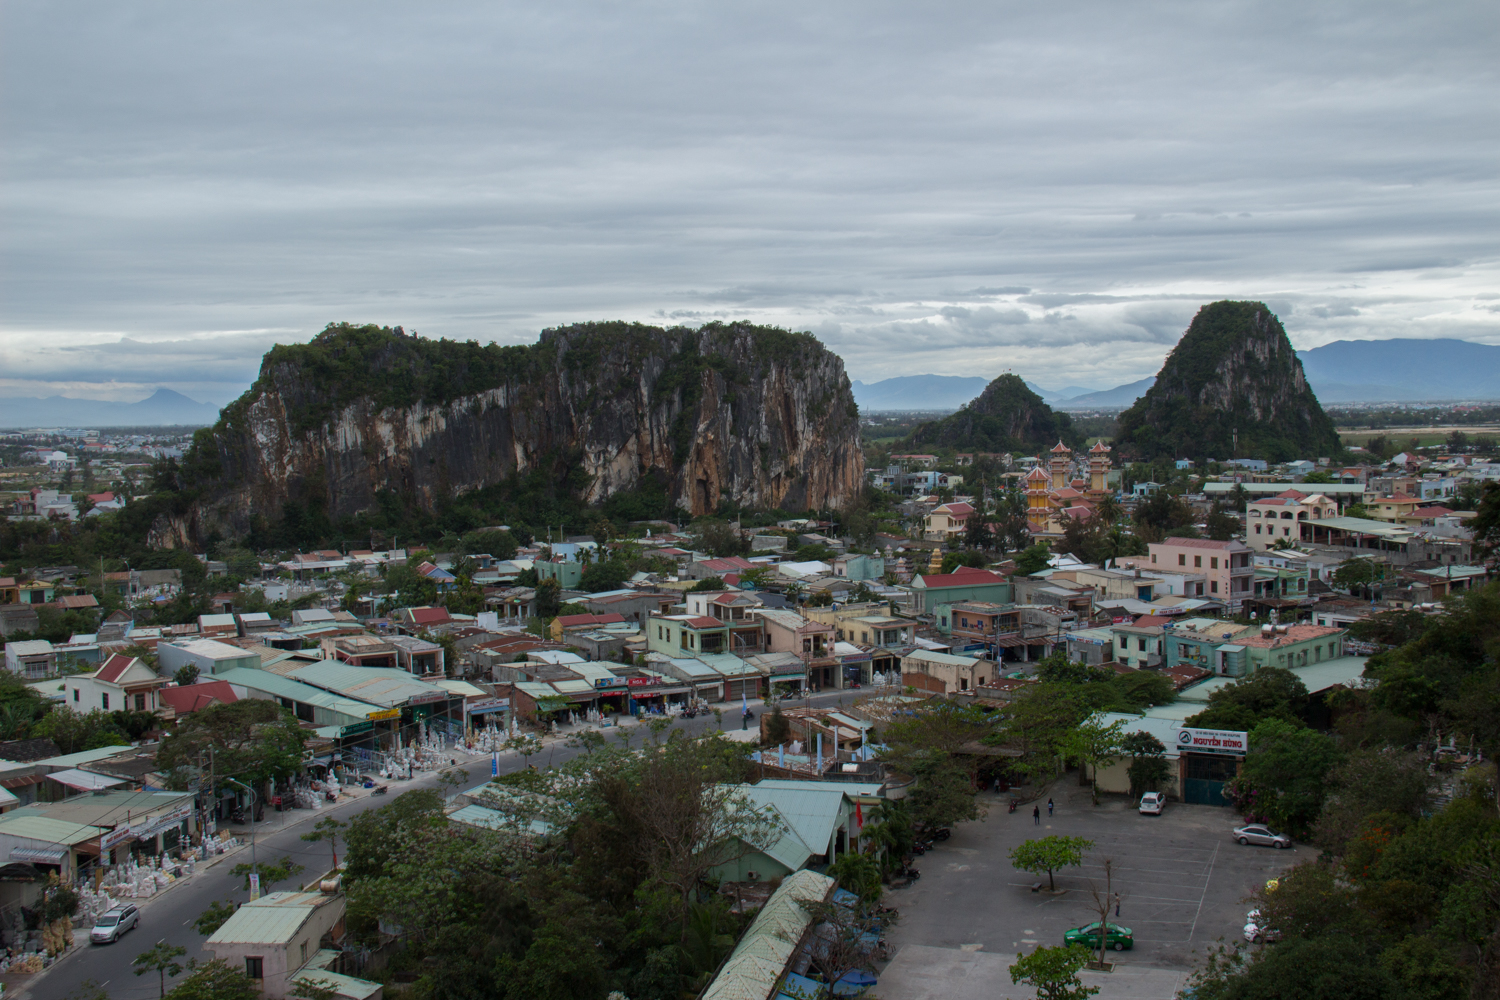 The view from the top of the Marble Mountain in Danang, Vietnam